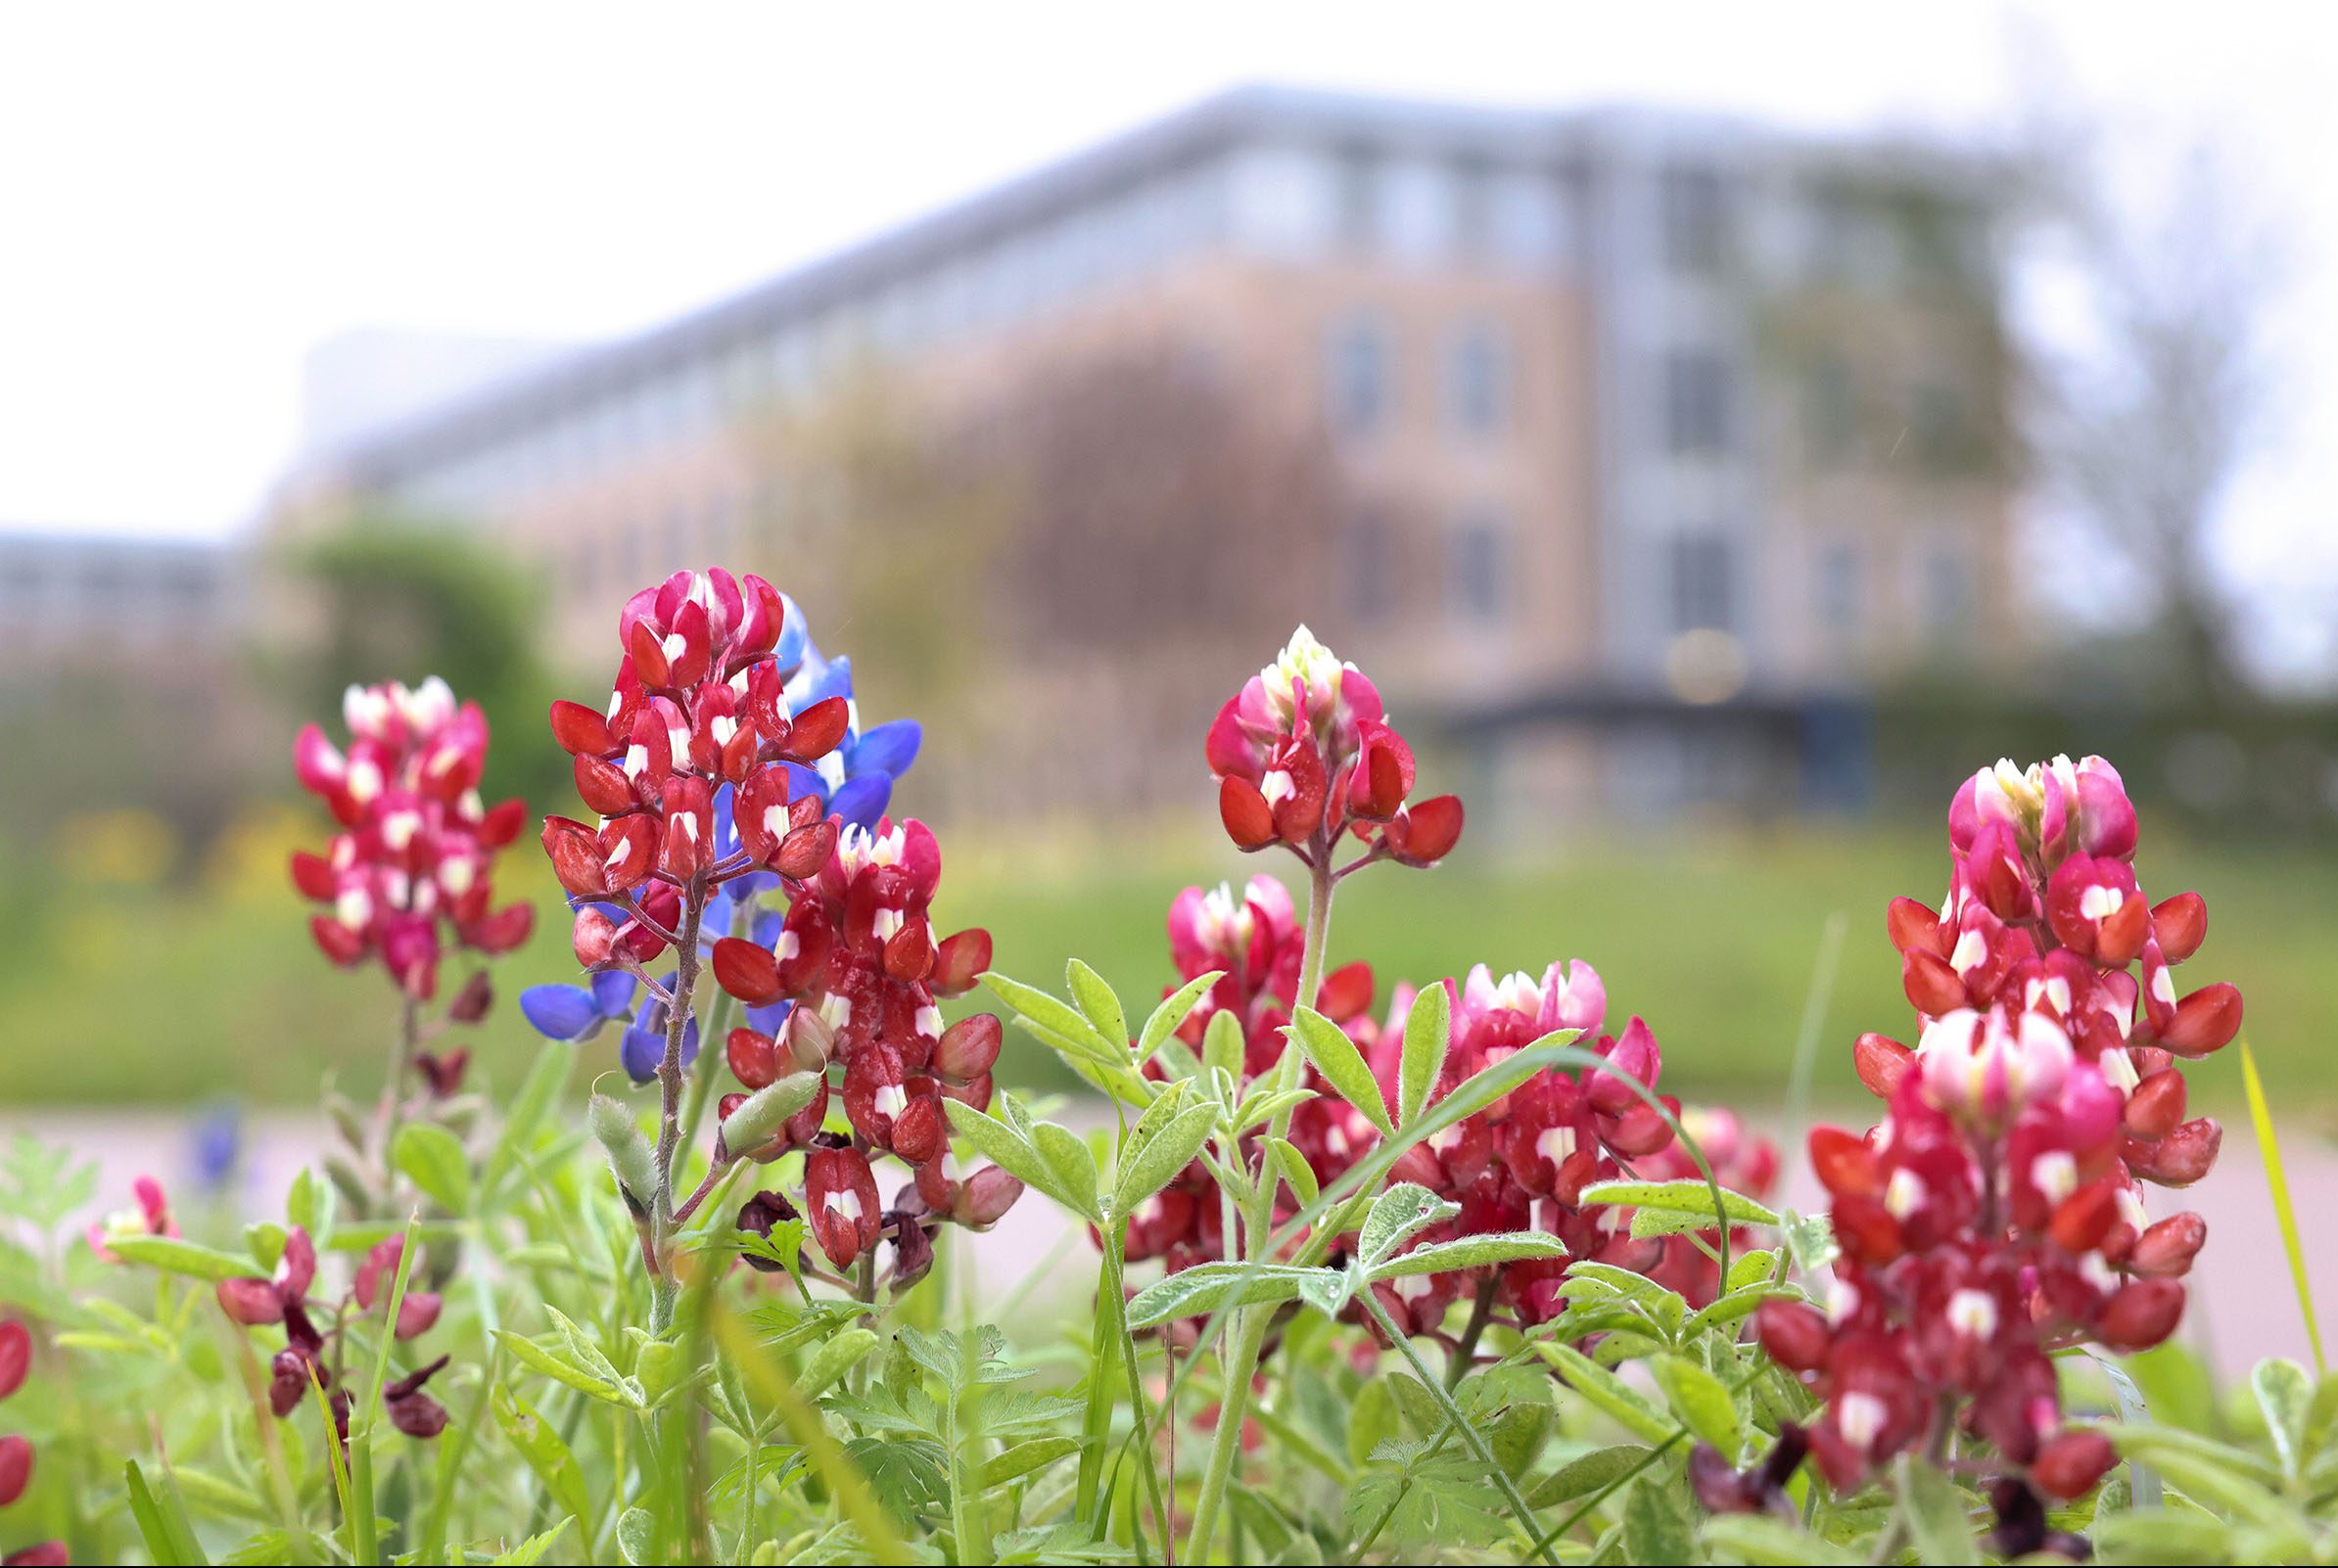 Bluebonnets in a maroon and white color with a large college building in the background